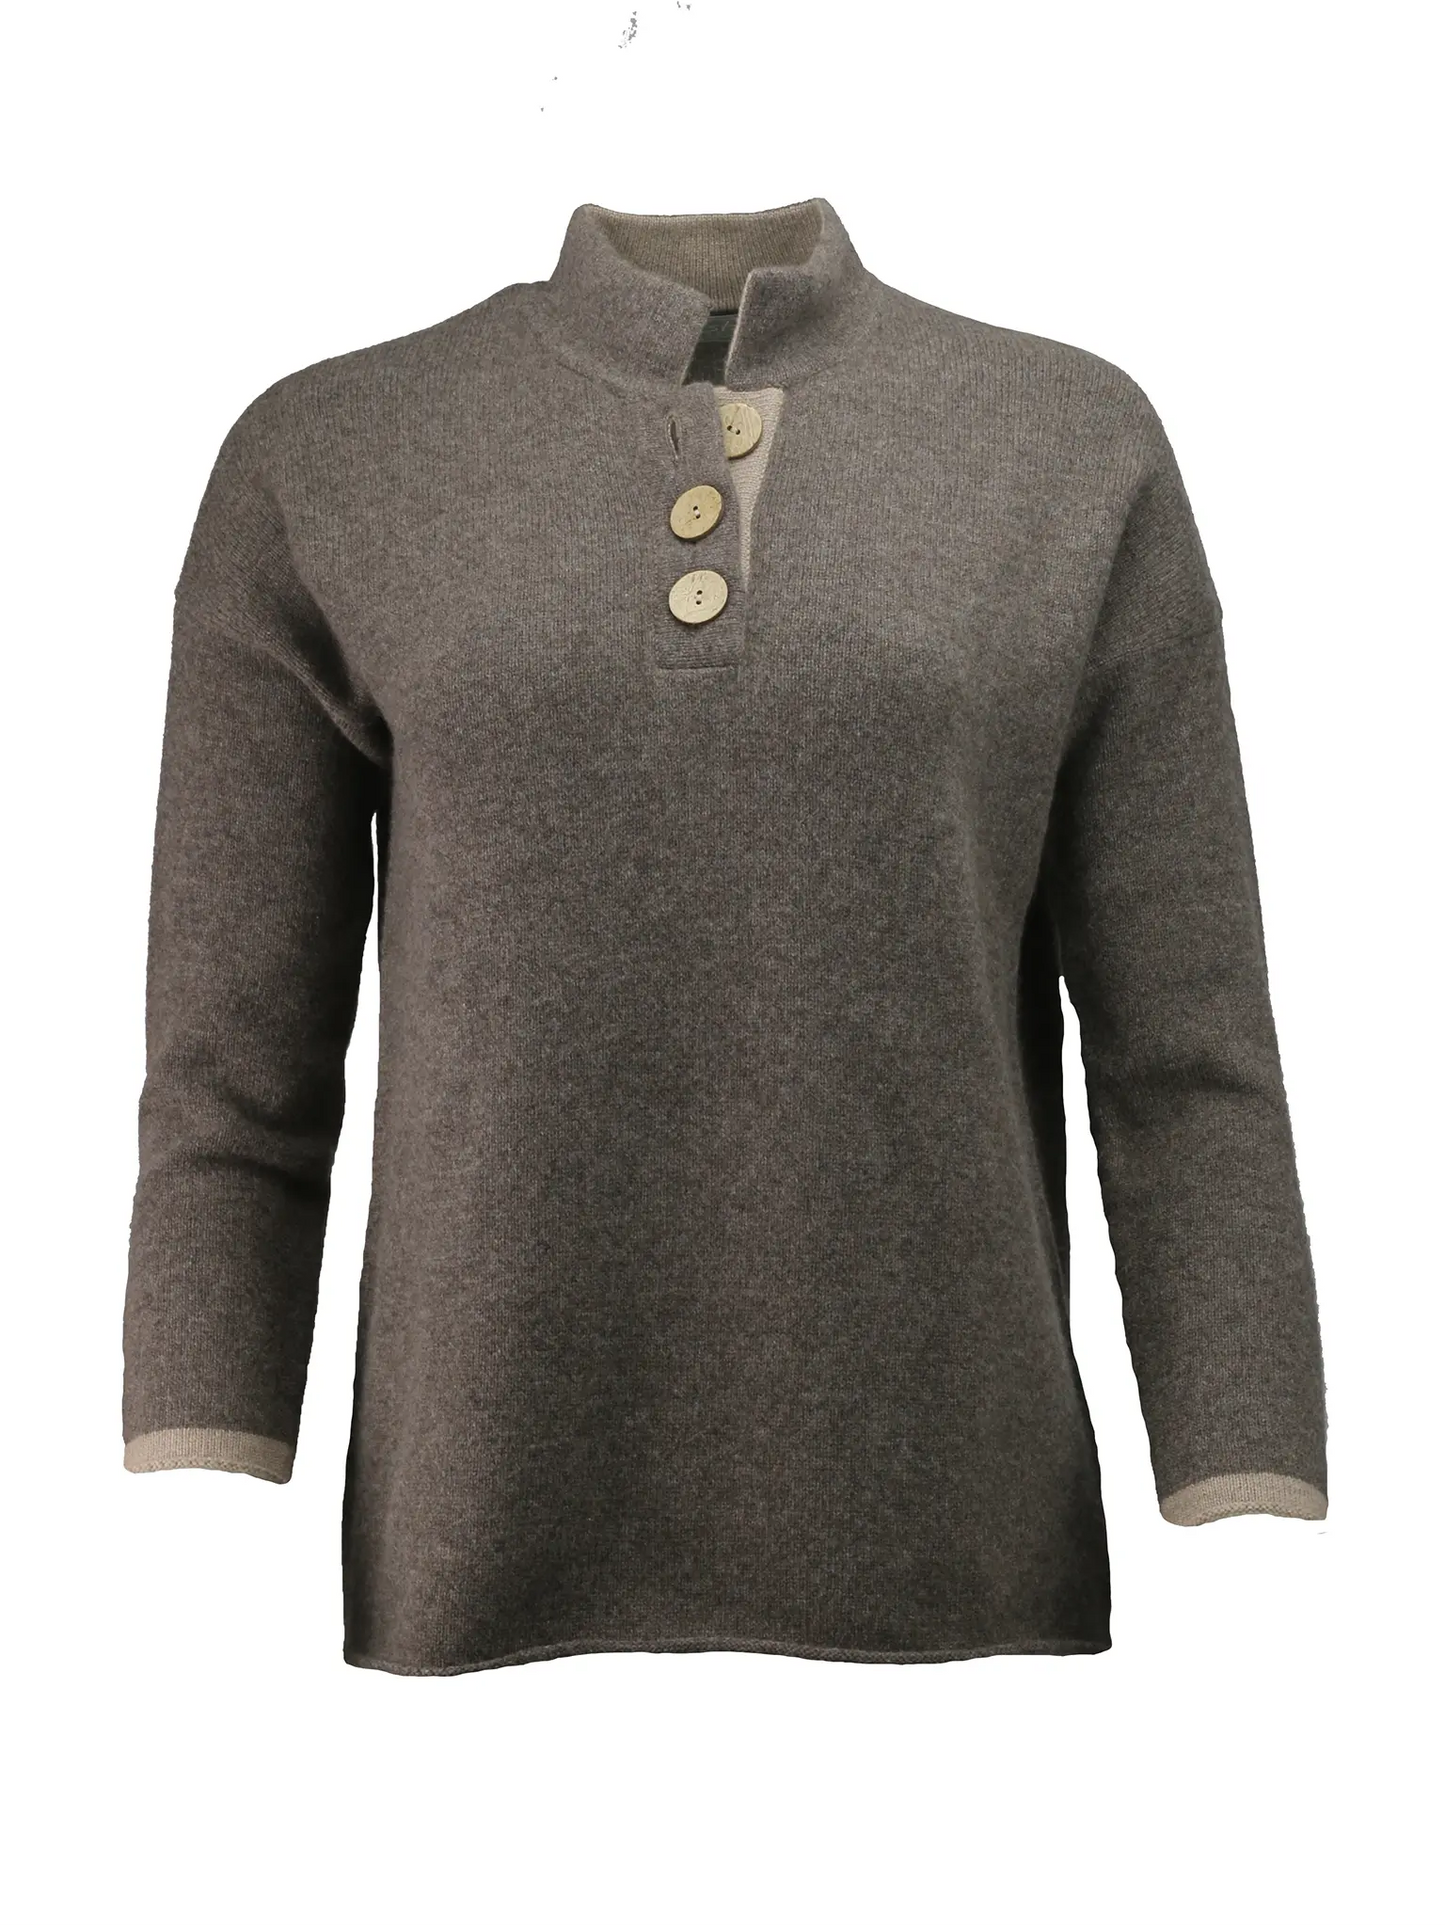 high collar jumper in brown and beige block colours with large coconut buttons 